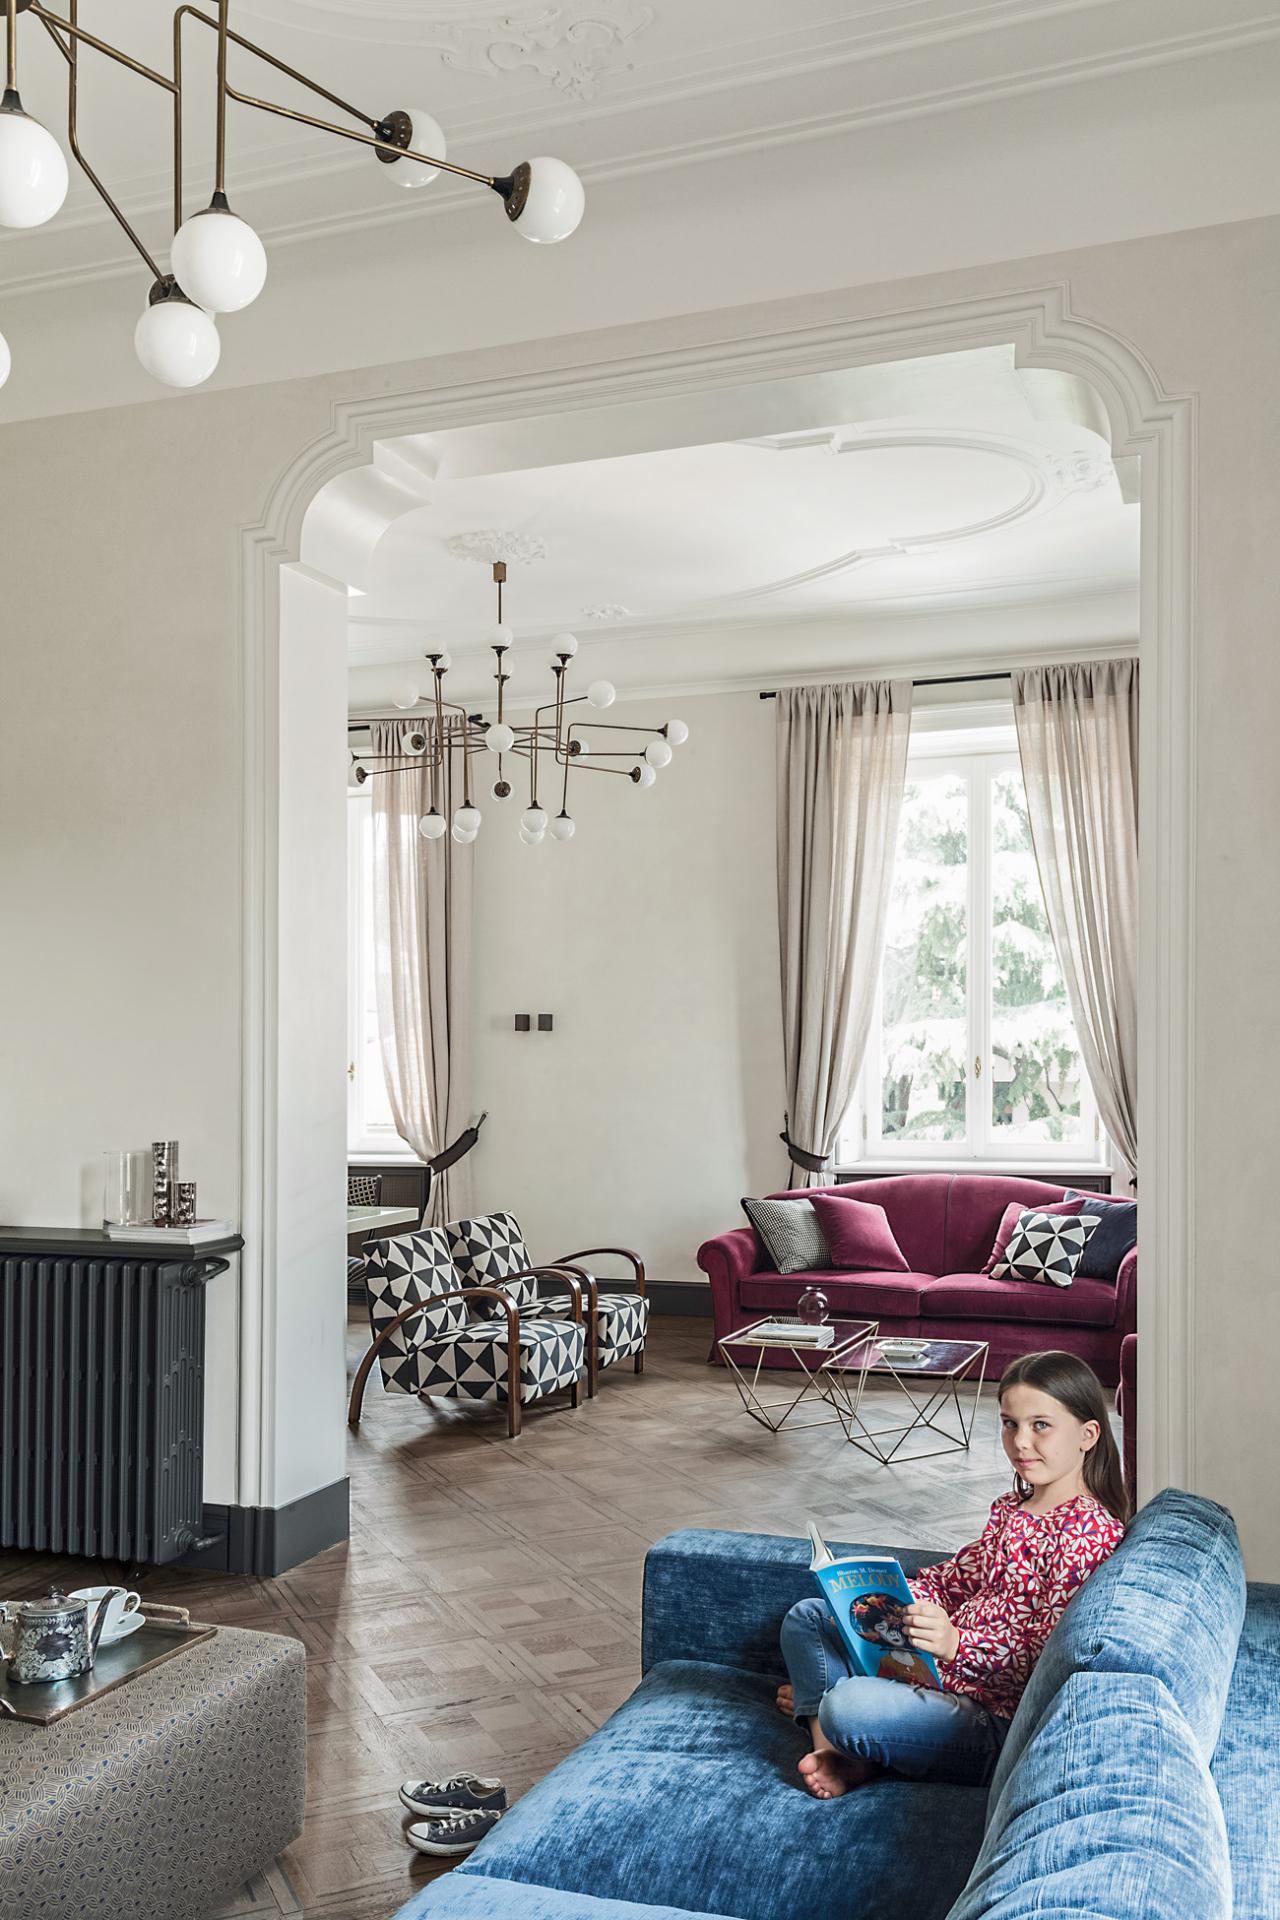 A Classic Milan Home Brimming with Old-World Charm